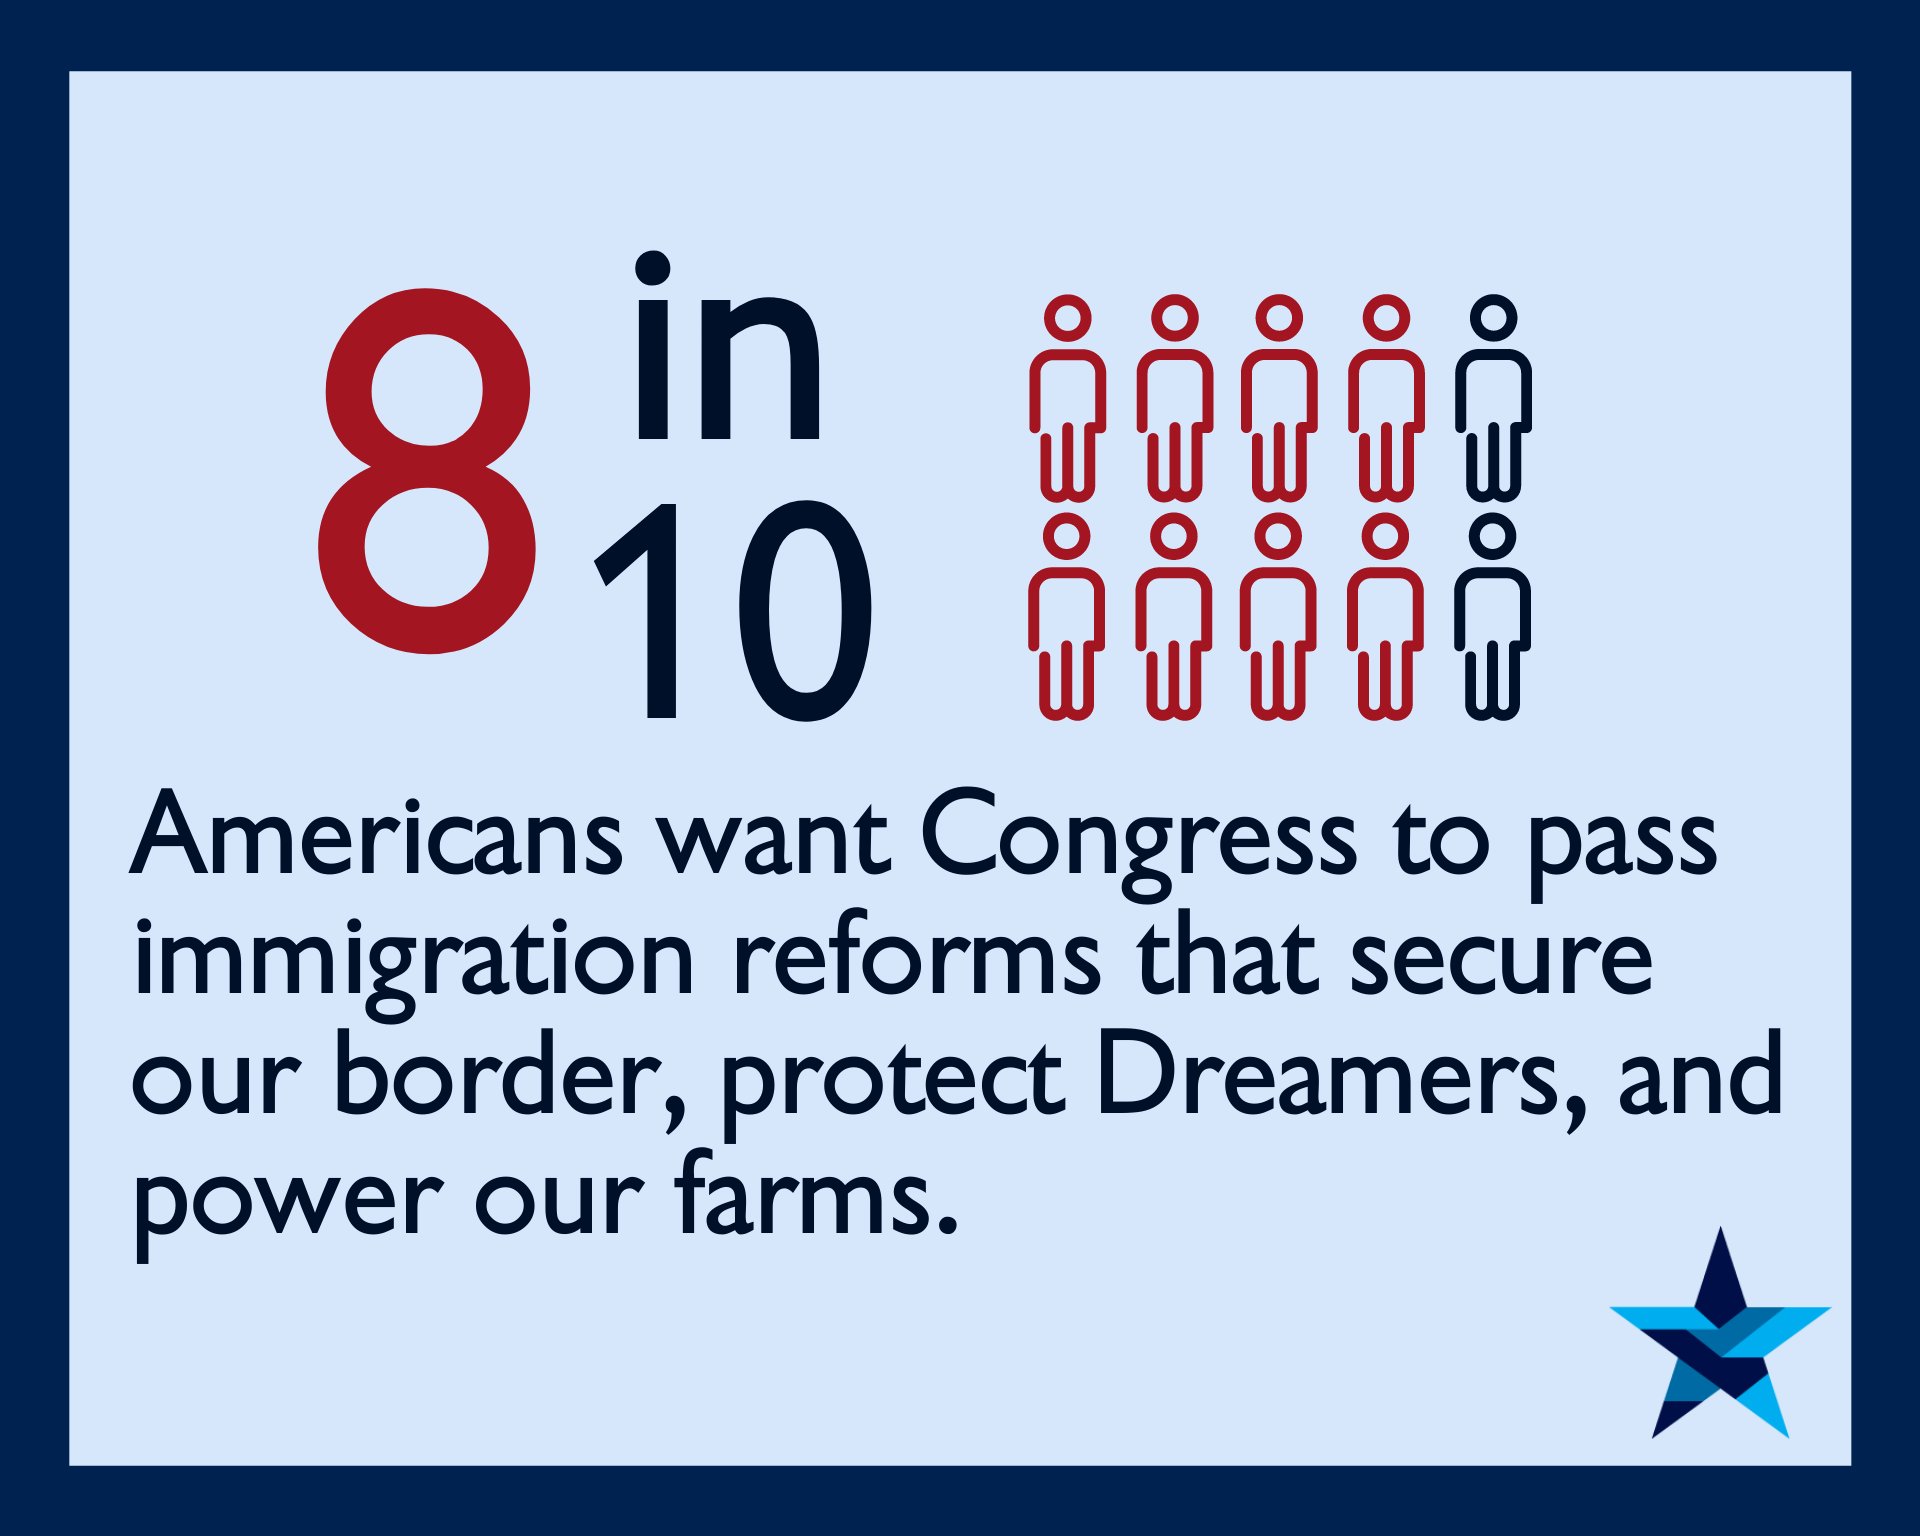 blue background with a blue border that reads "8 in 10 Americans want Congress to pass immigration reforms that secure our border, protect Dreamers, and power our farms."